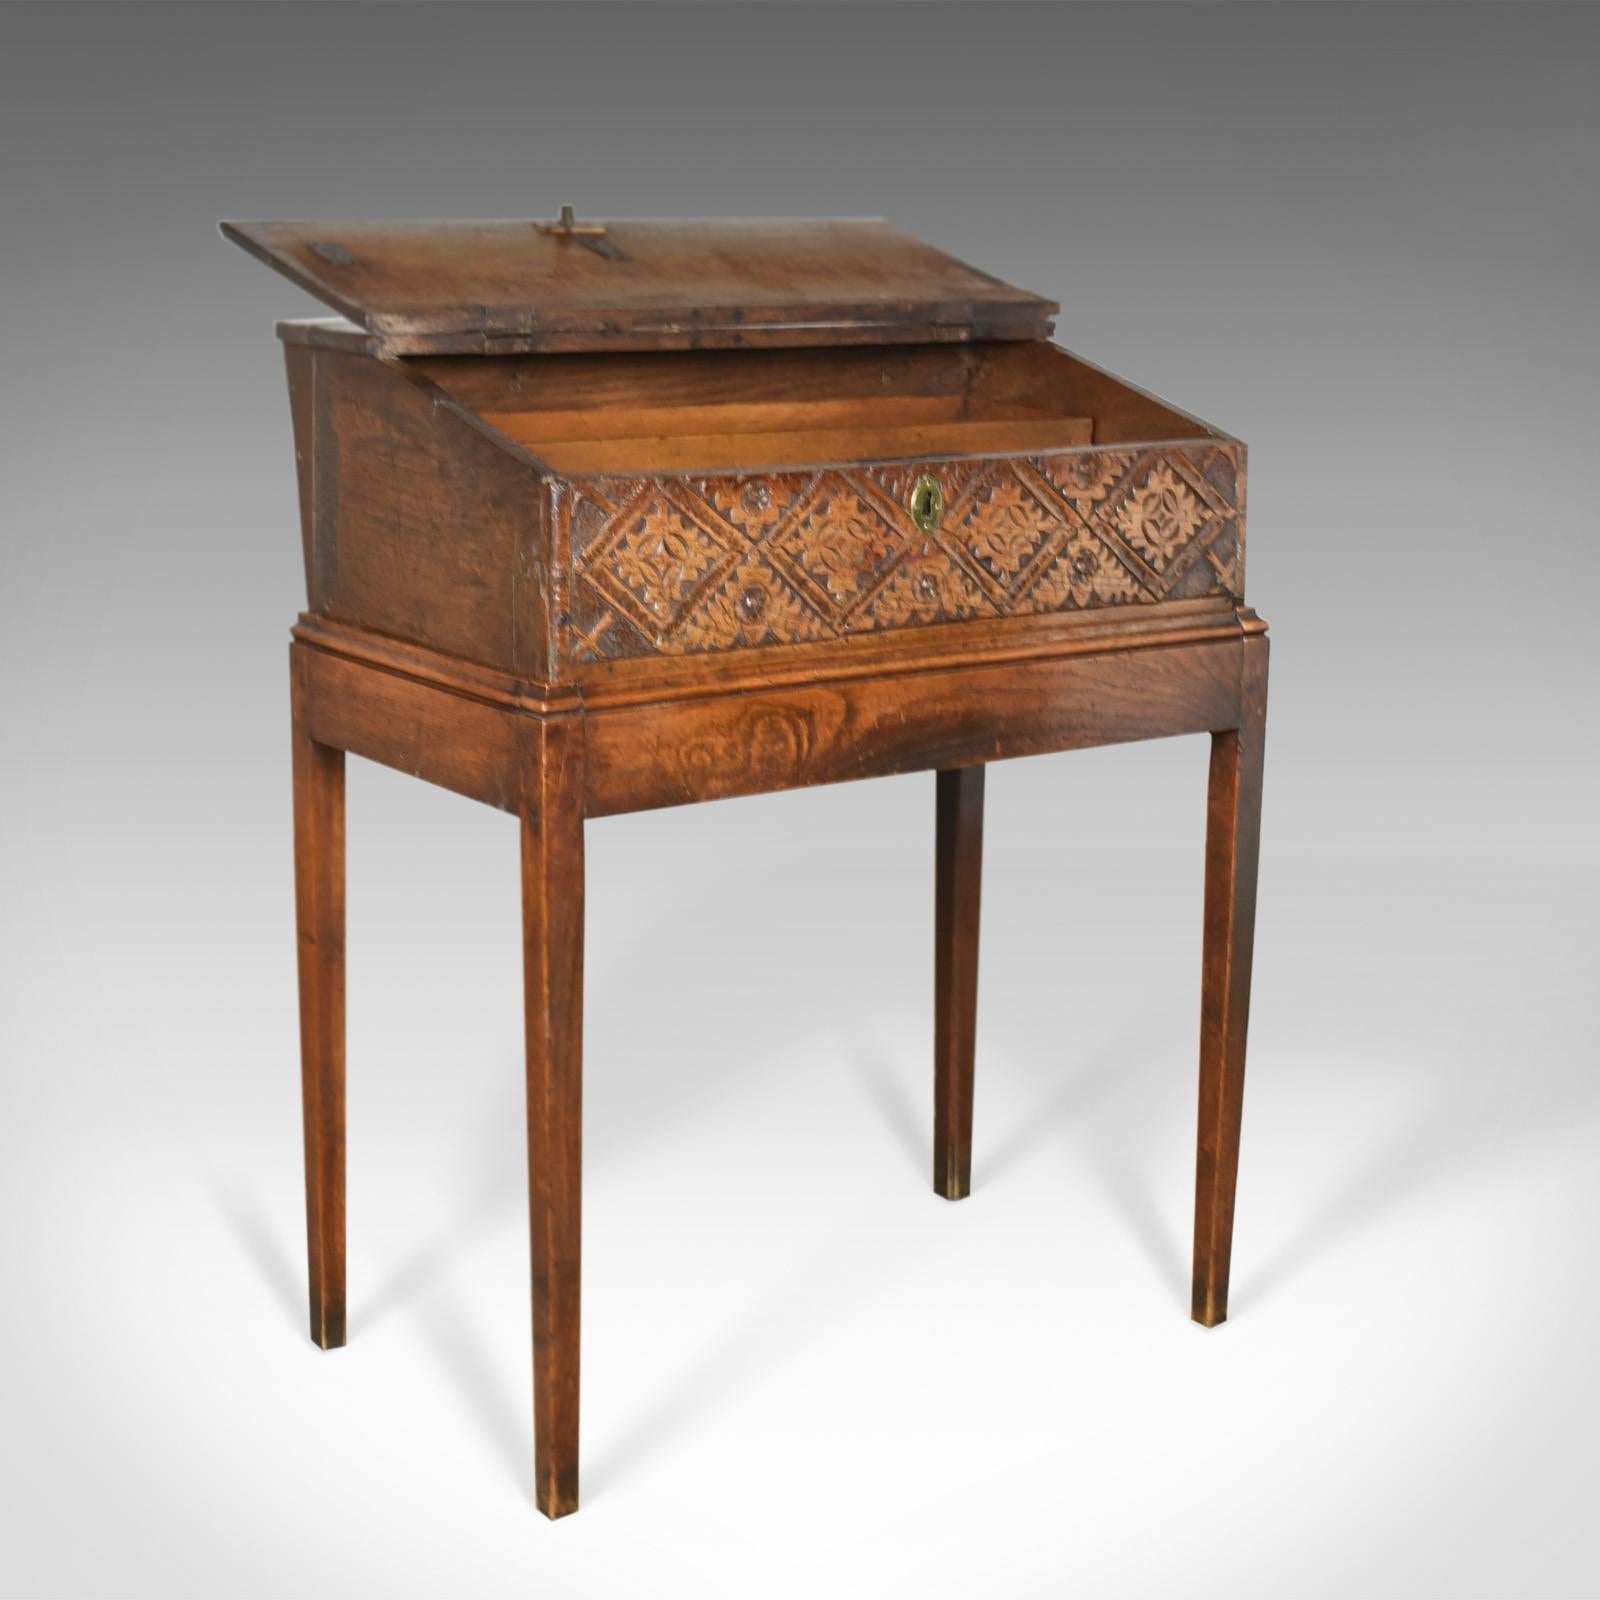 Charles II Antique Bible Box on Stand, English Oak Writing Slope 17th Century and Later